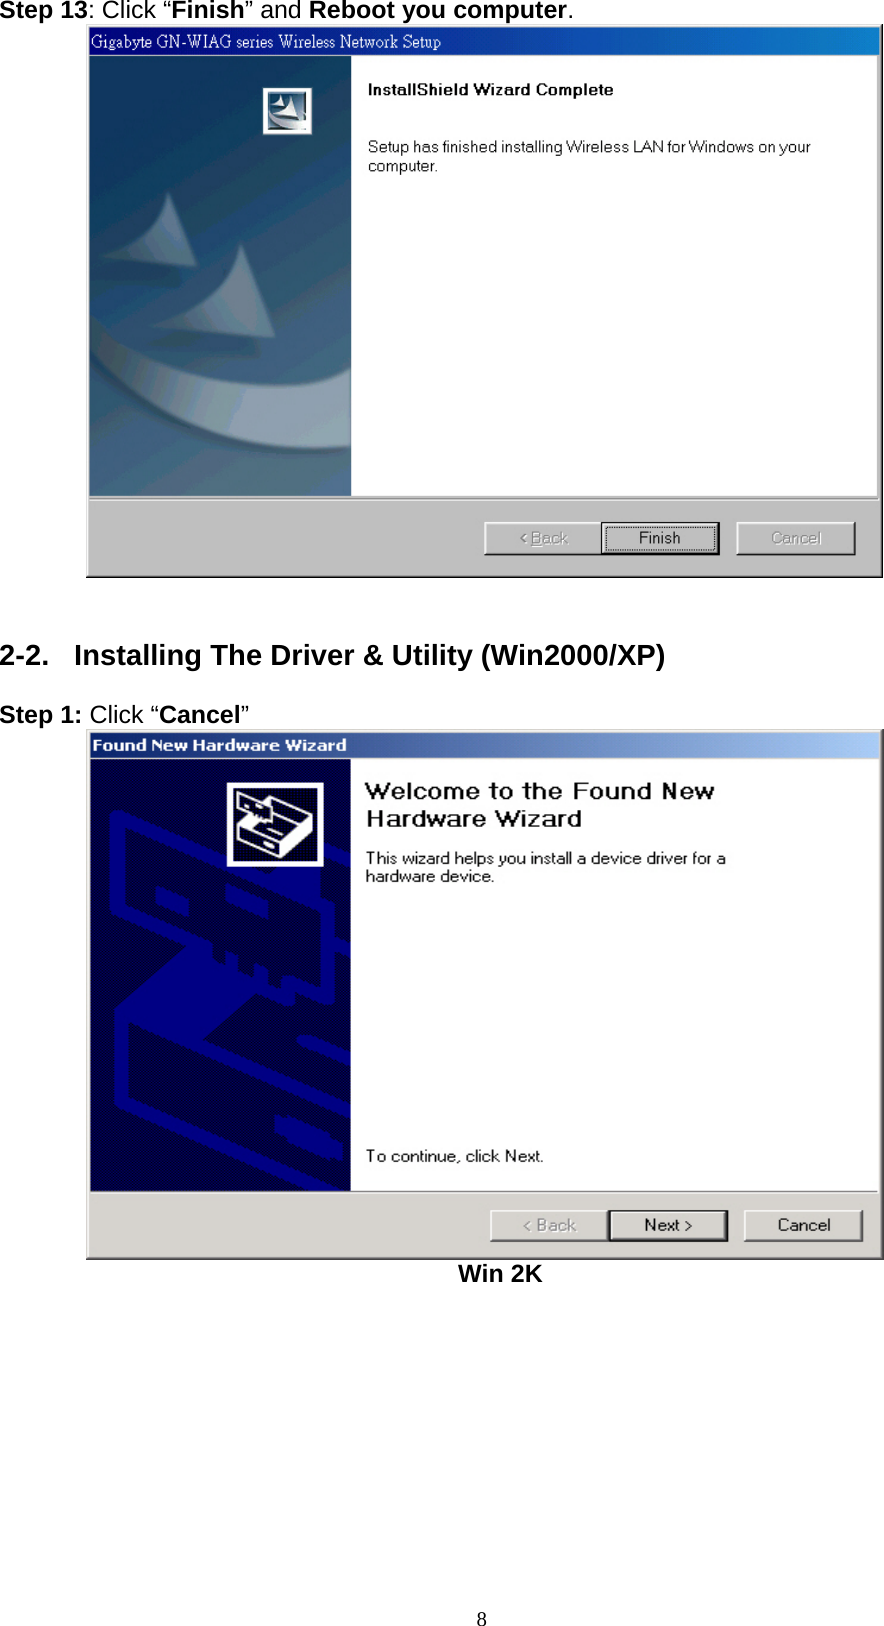 8  Step 13: Click “Finish” and Reboot you computer.            2-2.  Installing The Driver &amp; Utility (Win2000/XP)  Step 1: Click “Cancel”          Win 2K  